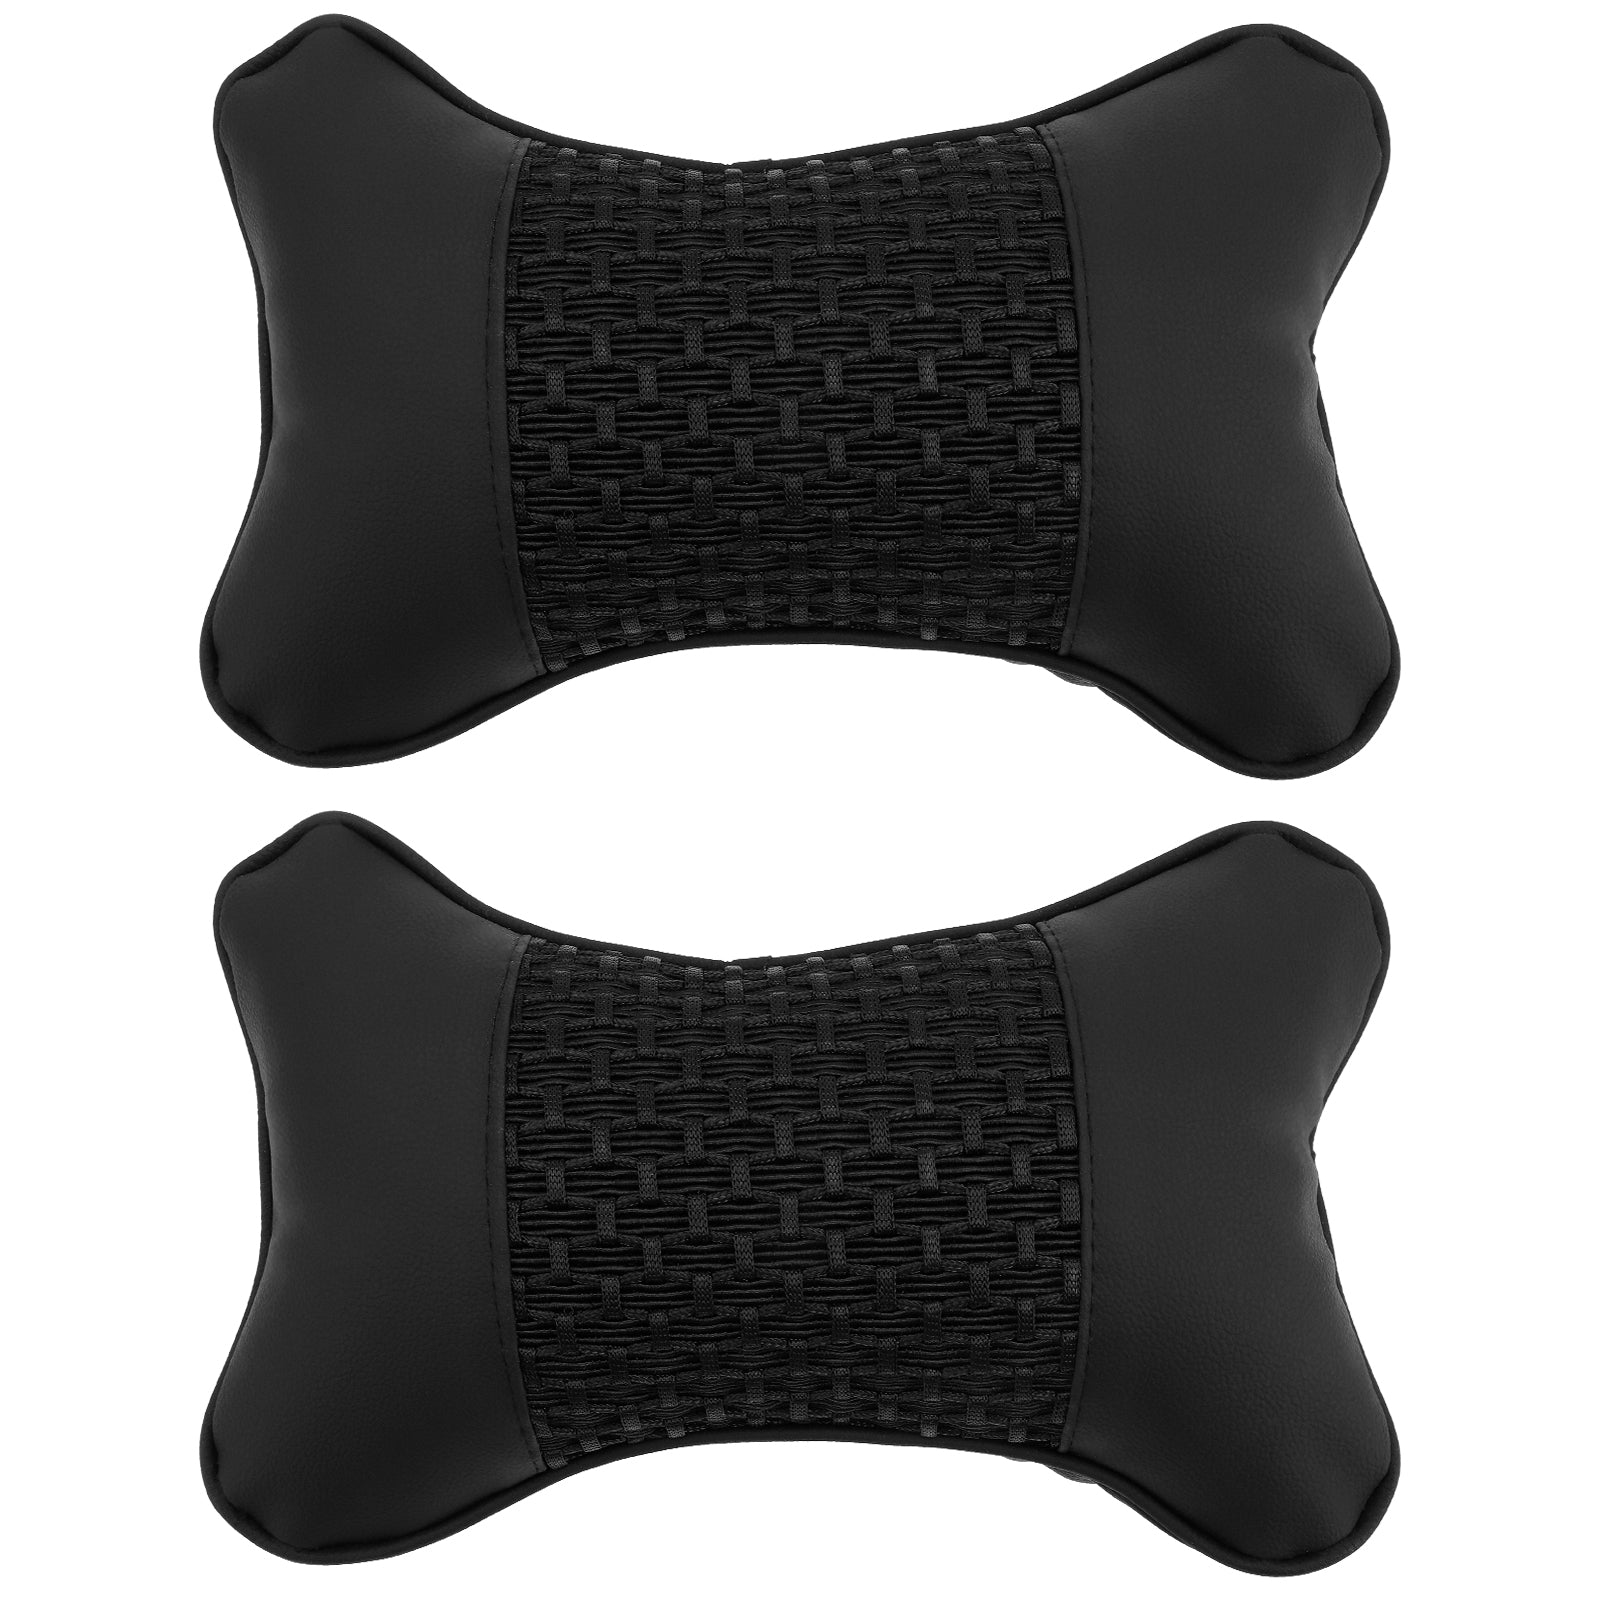 Etereauty Car Pillow Neck Headrest Head Support Rest Cushion Sleeping Road Pal Pp Cotton Driving Travel Leather Pillows Cervical